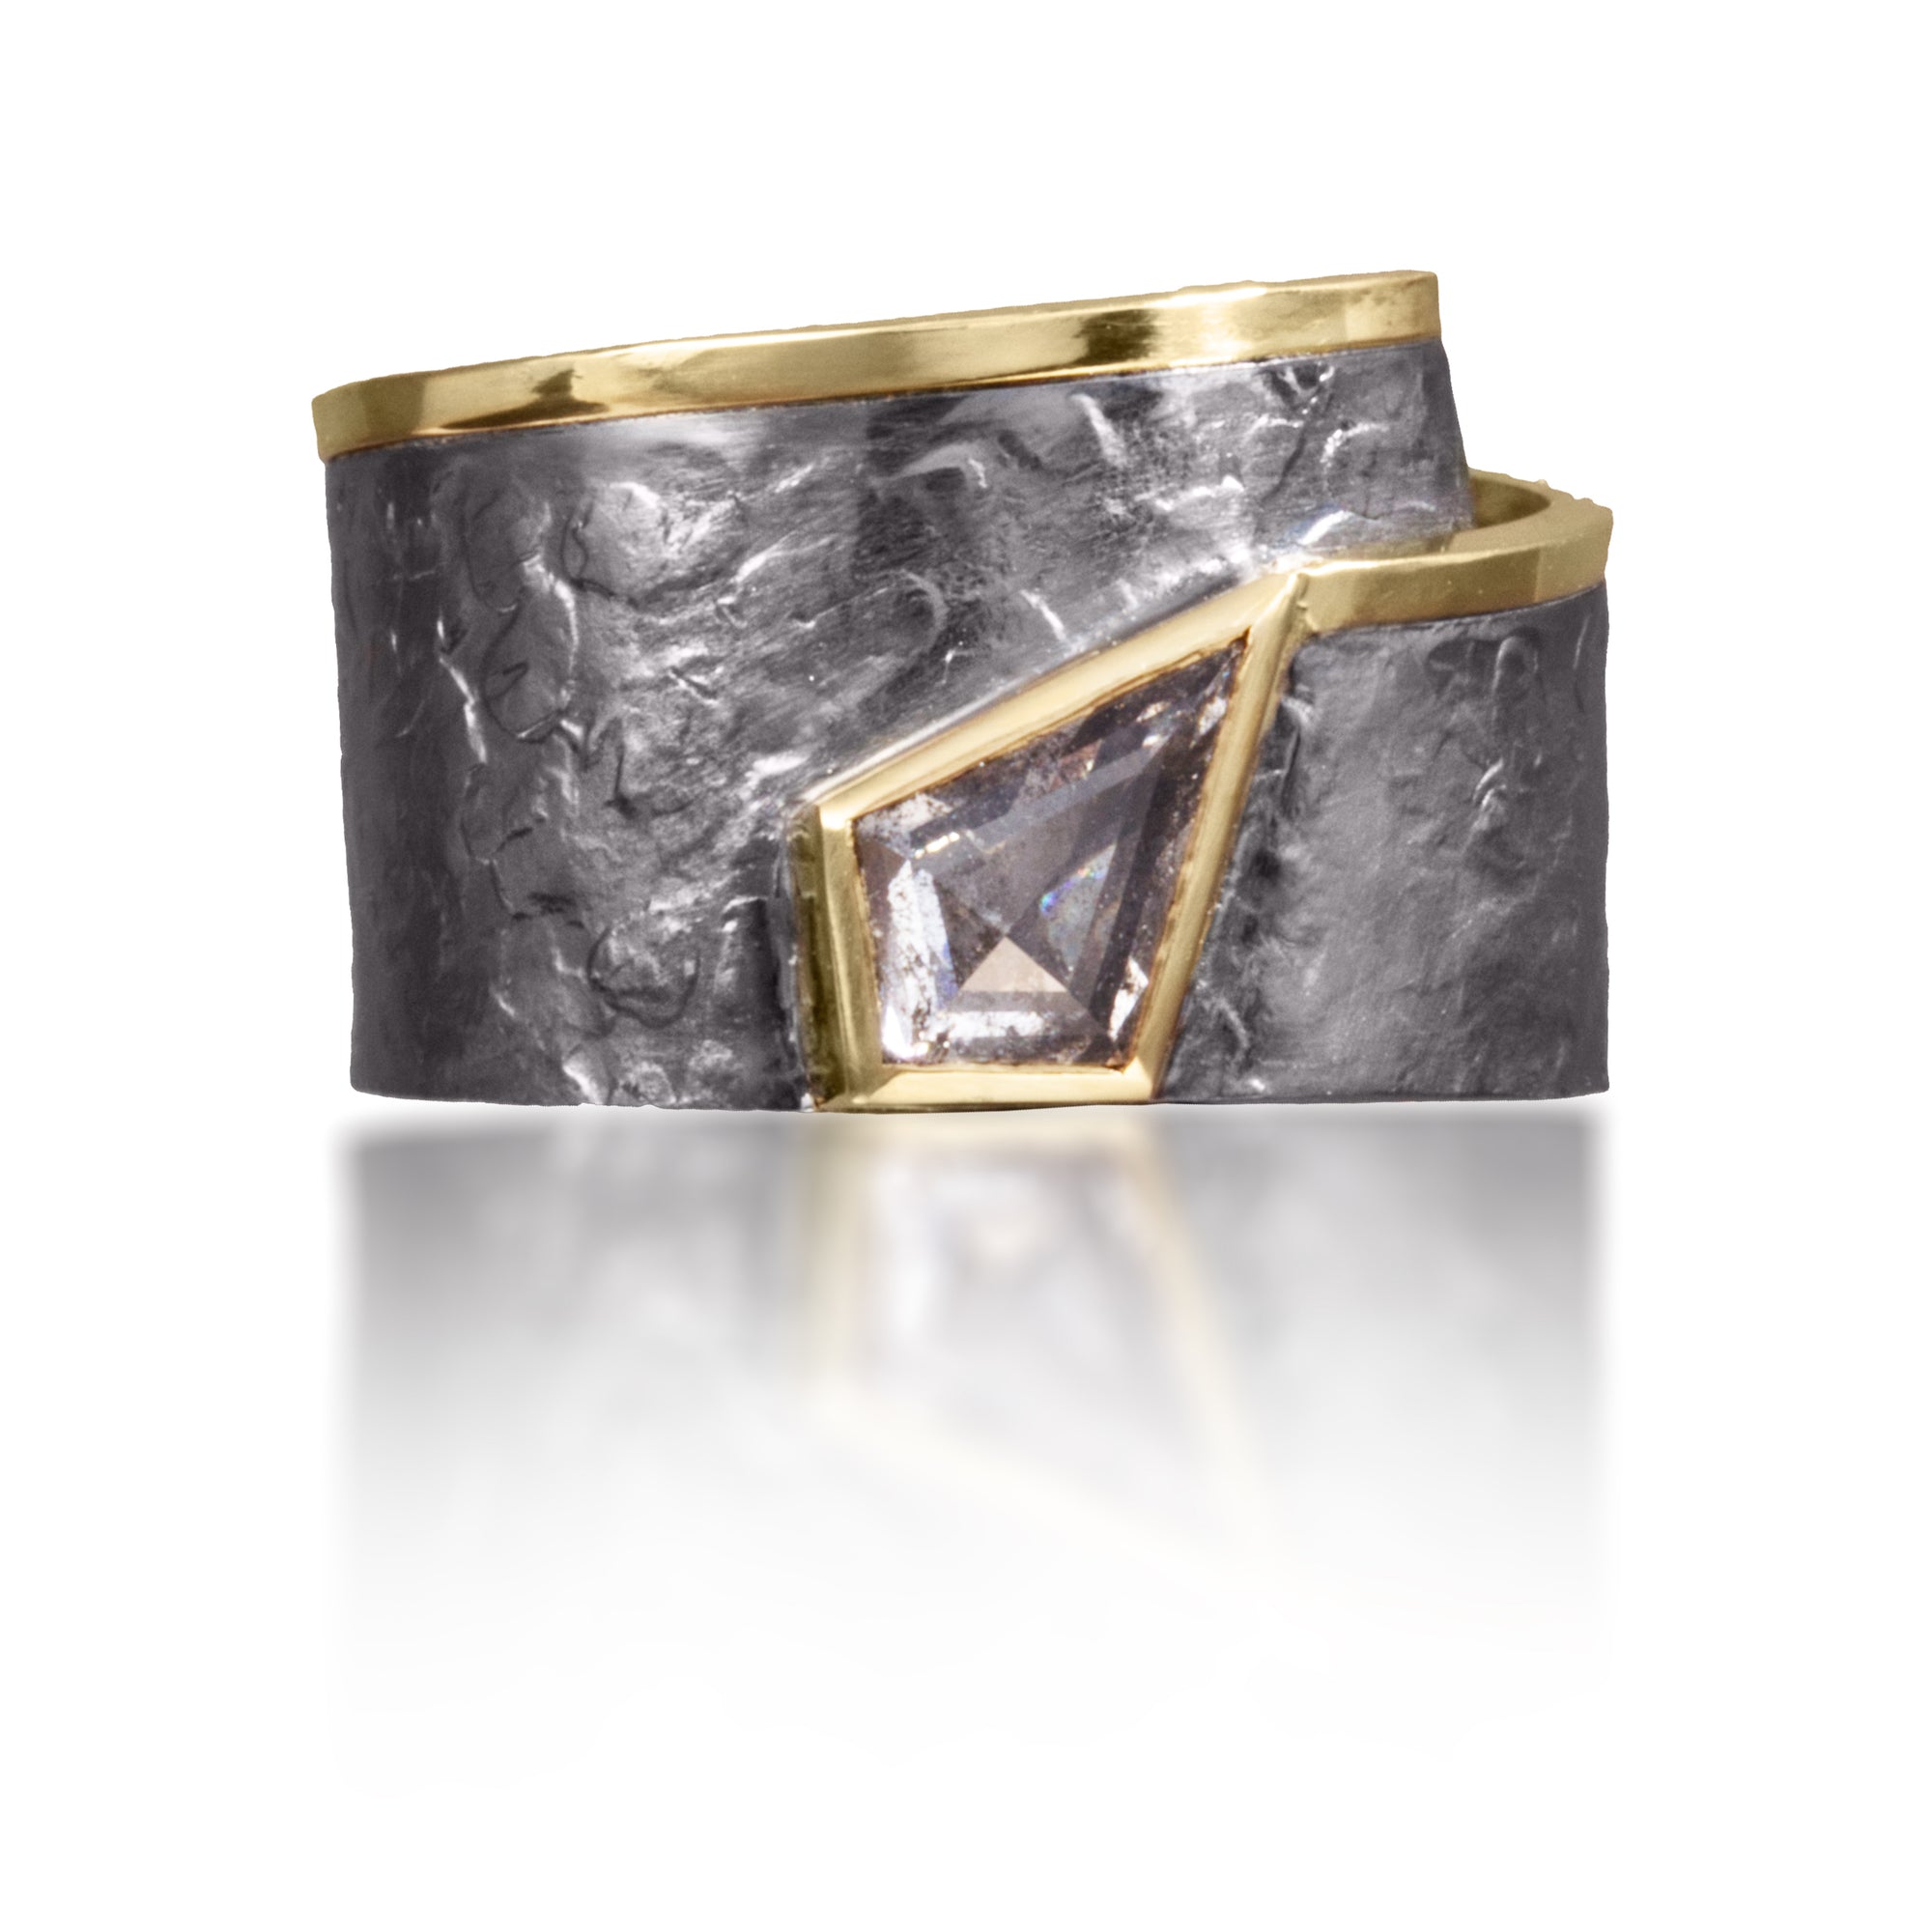 This simple, yet distinctive, one of kind ring in 18k gold and oxidized silver features a bezel set, “salt and pepper” diamond, 0.83 tcw.  It is forged, textured and fabricated by hand.  